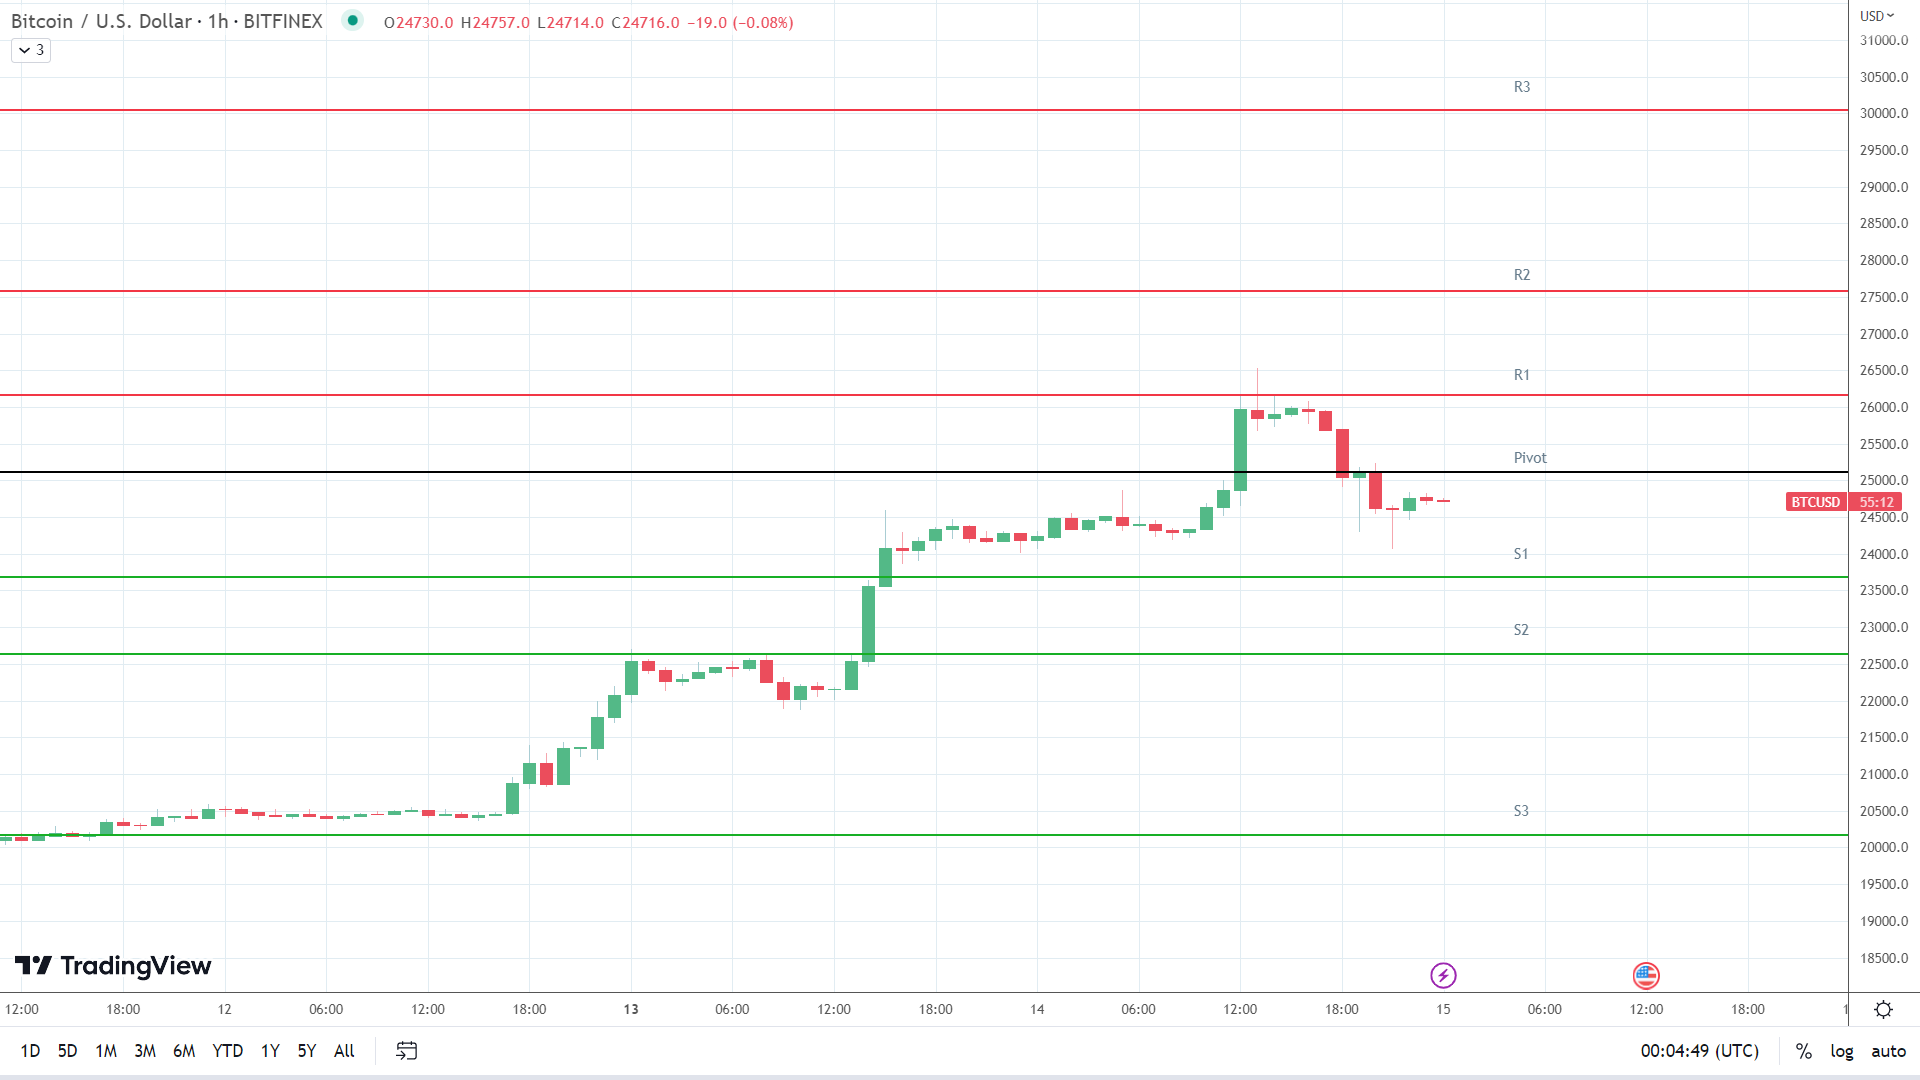 BTC resistance levels in play above the pivot.